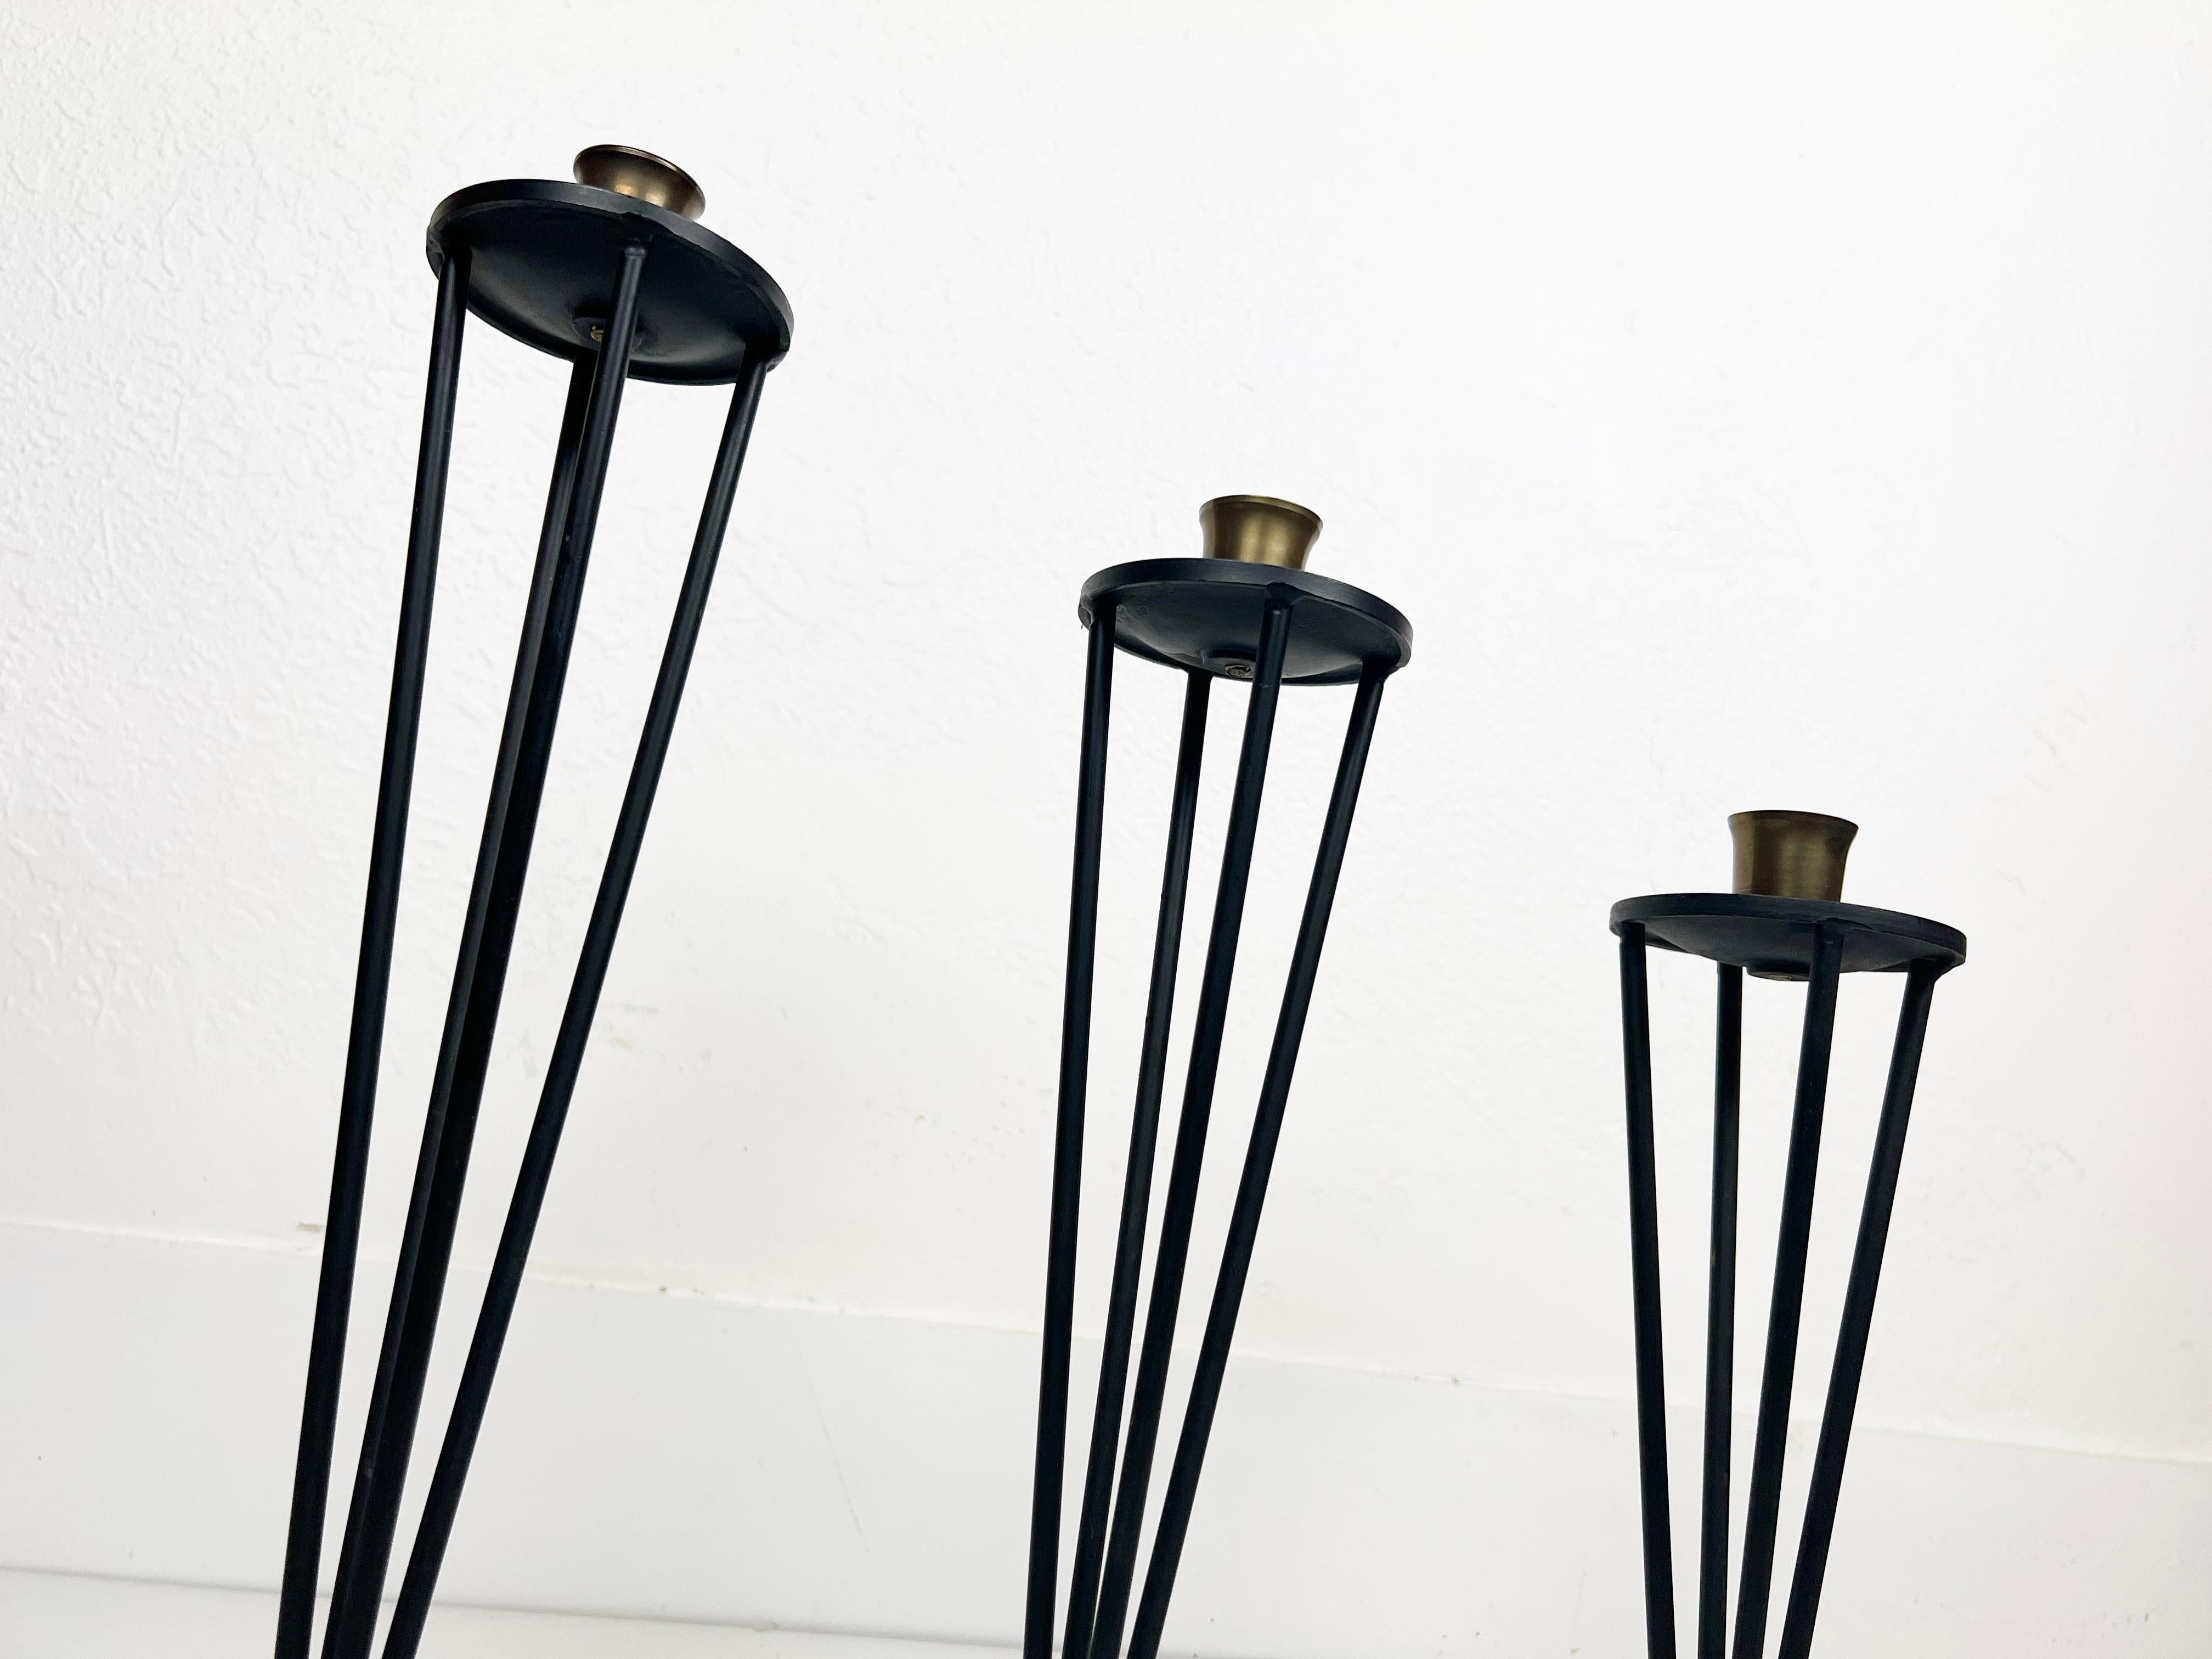 Modernist Black Enameled Metal and Brass Candleholders, Set of 3 In Excellent Condition For Sale In Fort Lauderdale, FL